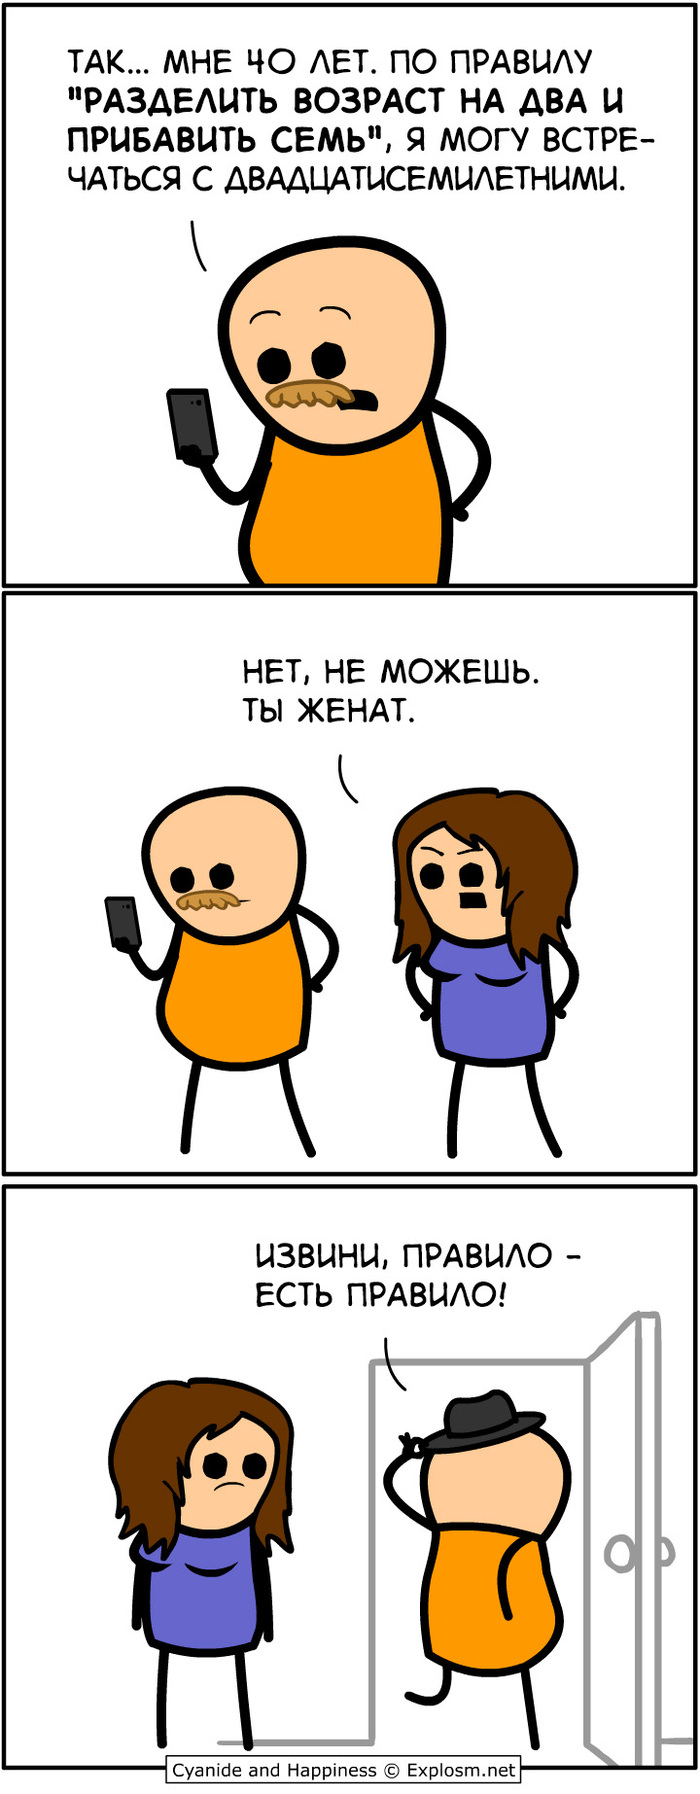  -   , Cyanide and Happiness, , , , , , , , ,   , , , , 